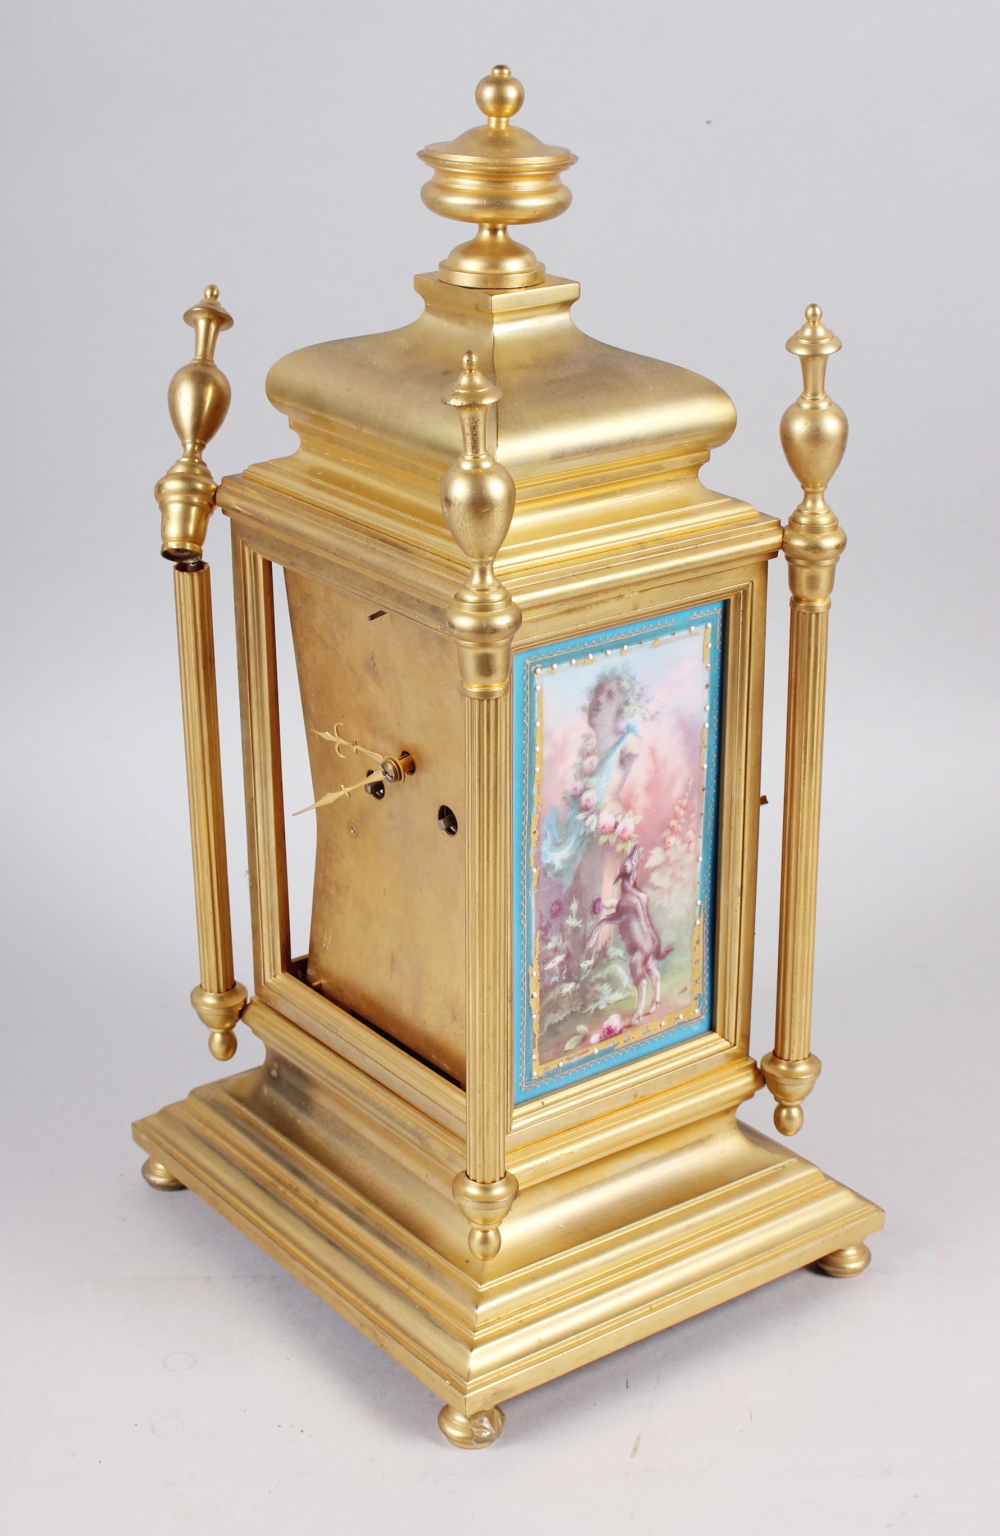 A gilt metal Continental mantel clock with hand-painted porcelain panel, 15 1/4" high (for